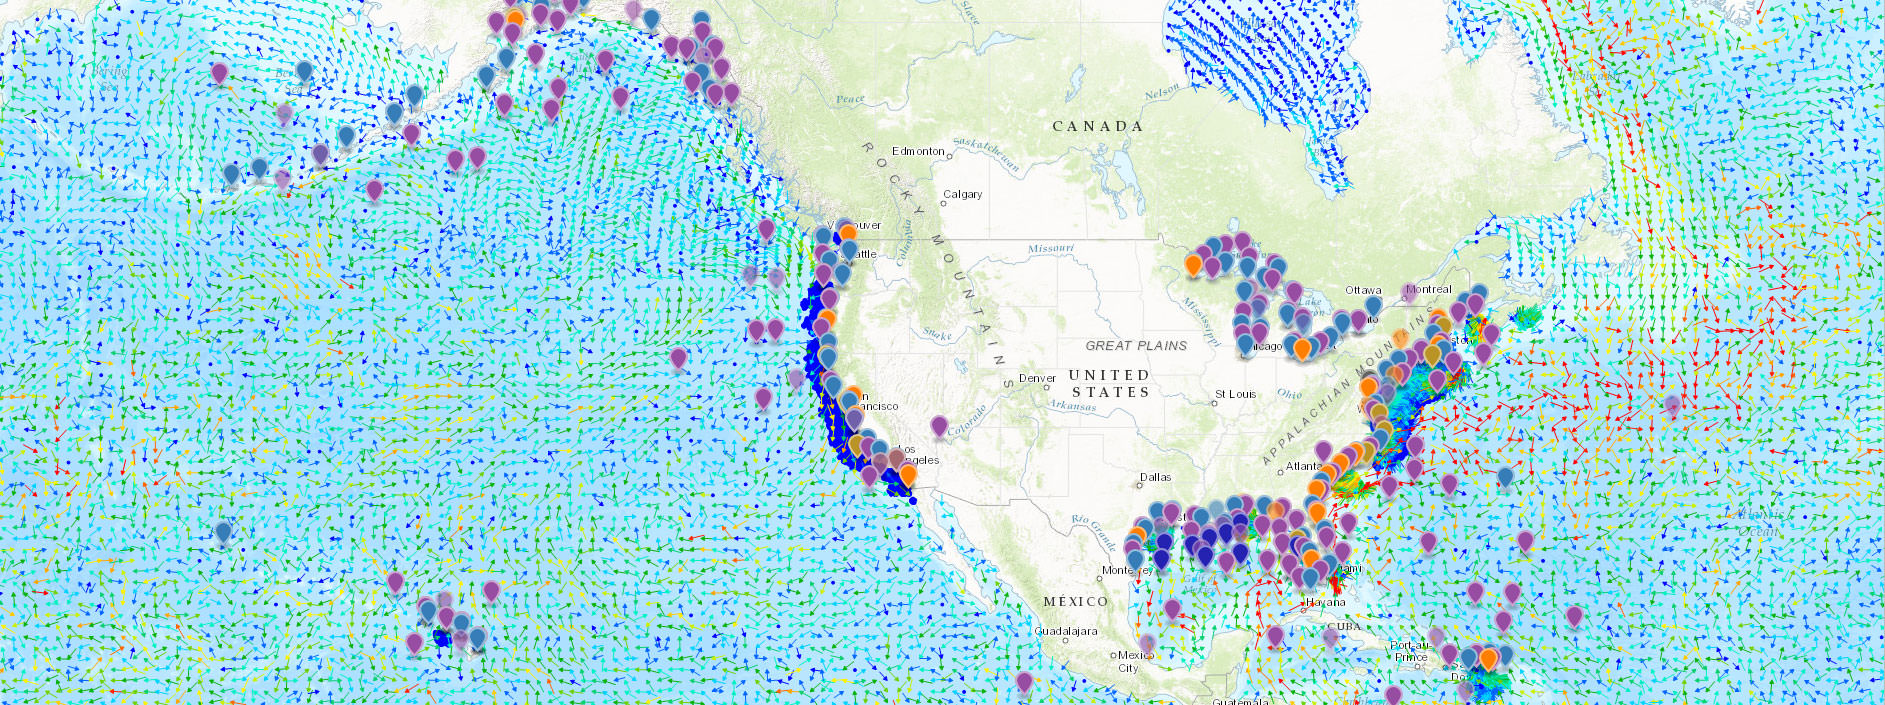 View of the Environmental Data Server (EDS) map